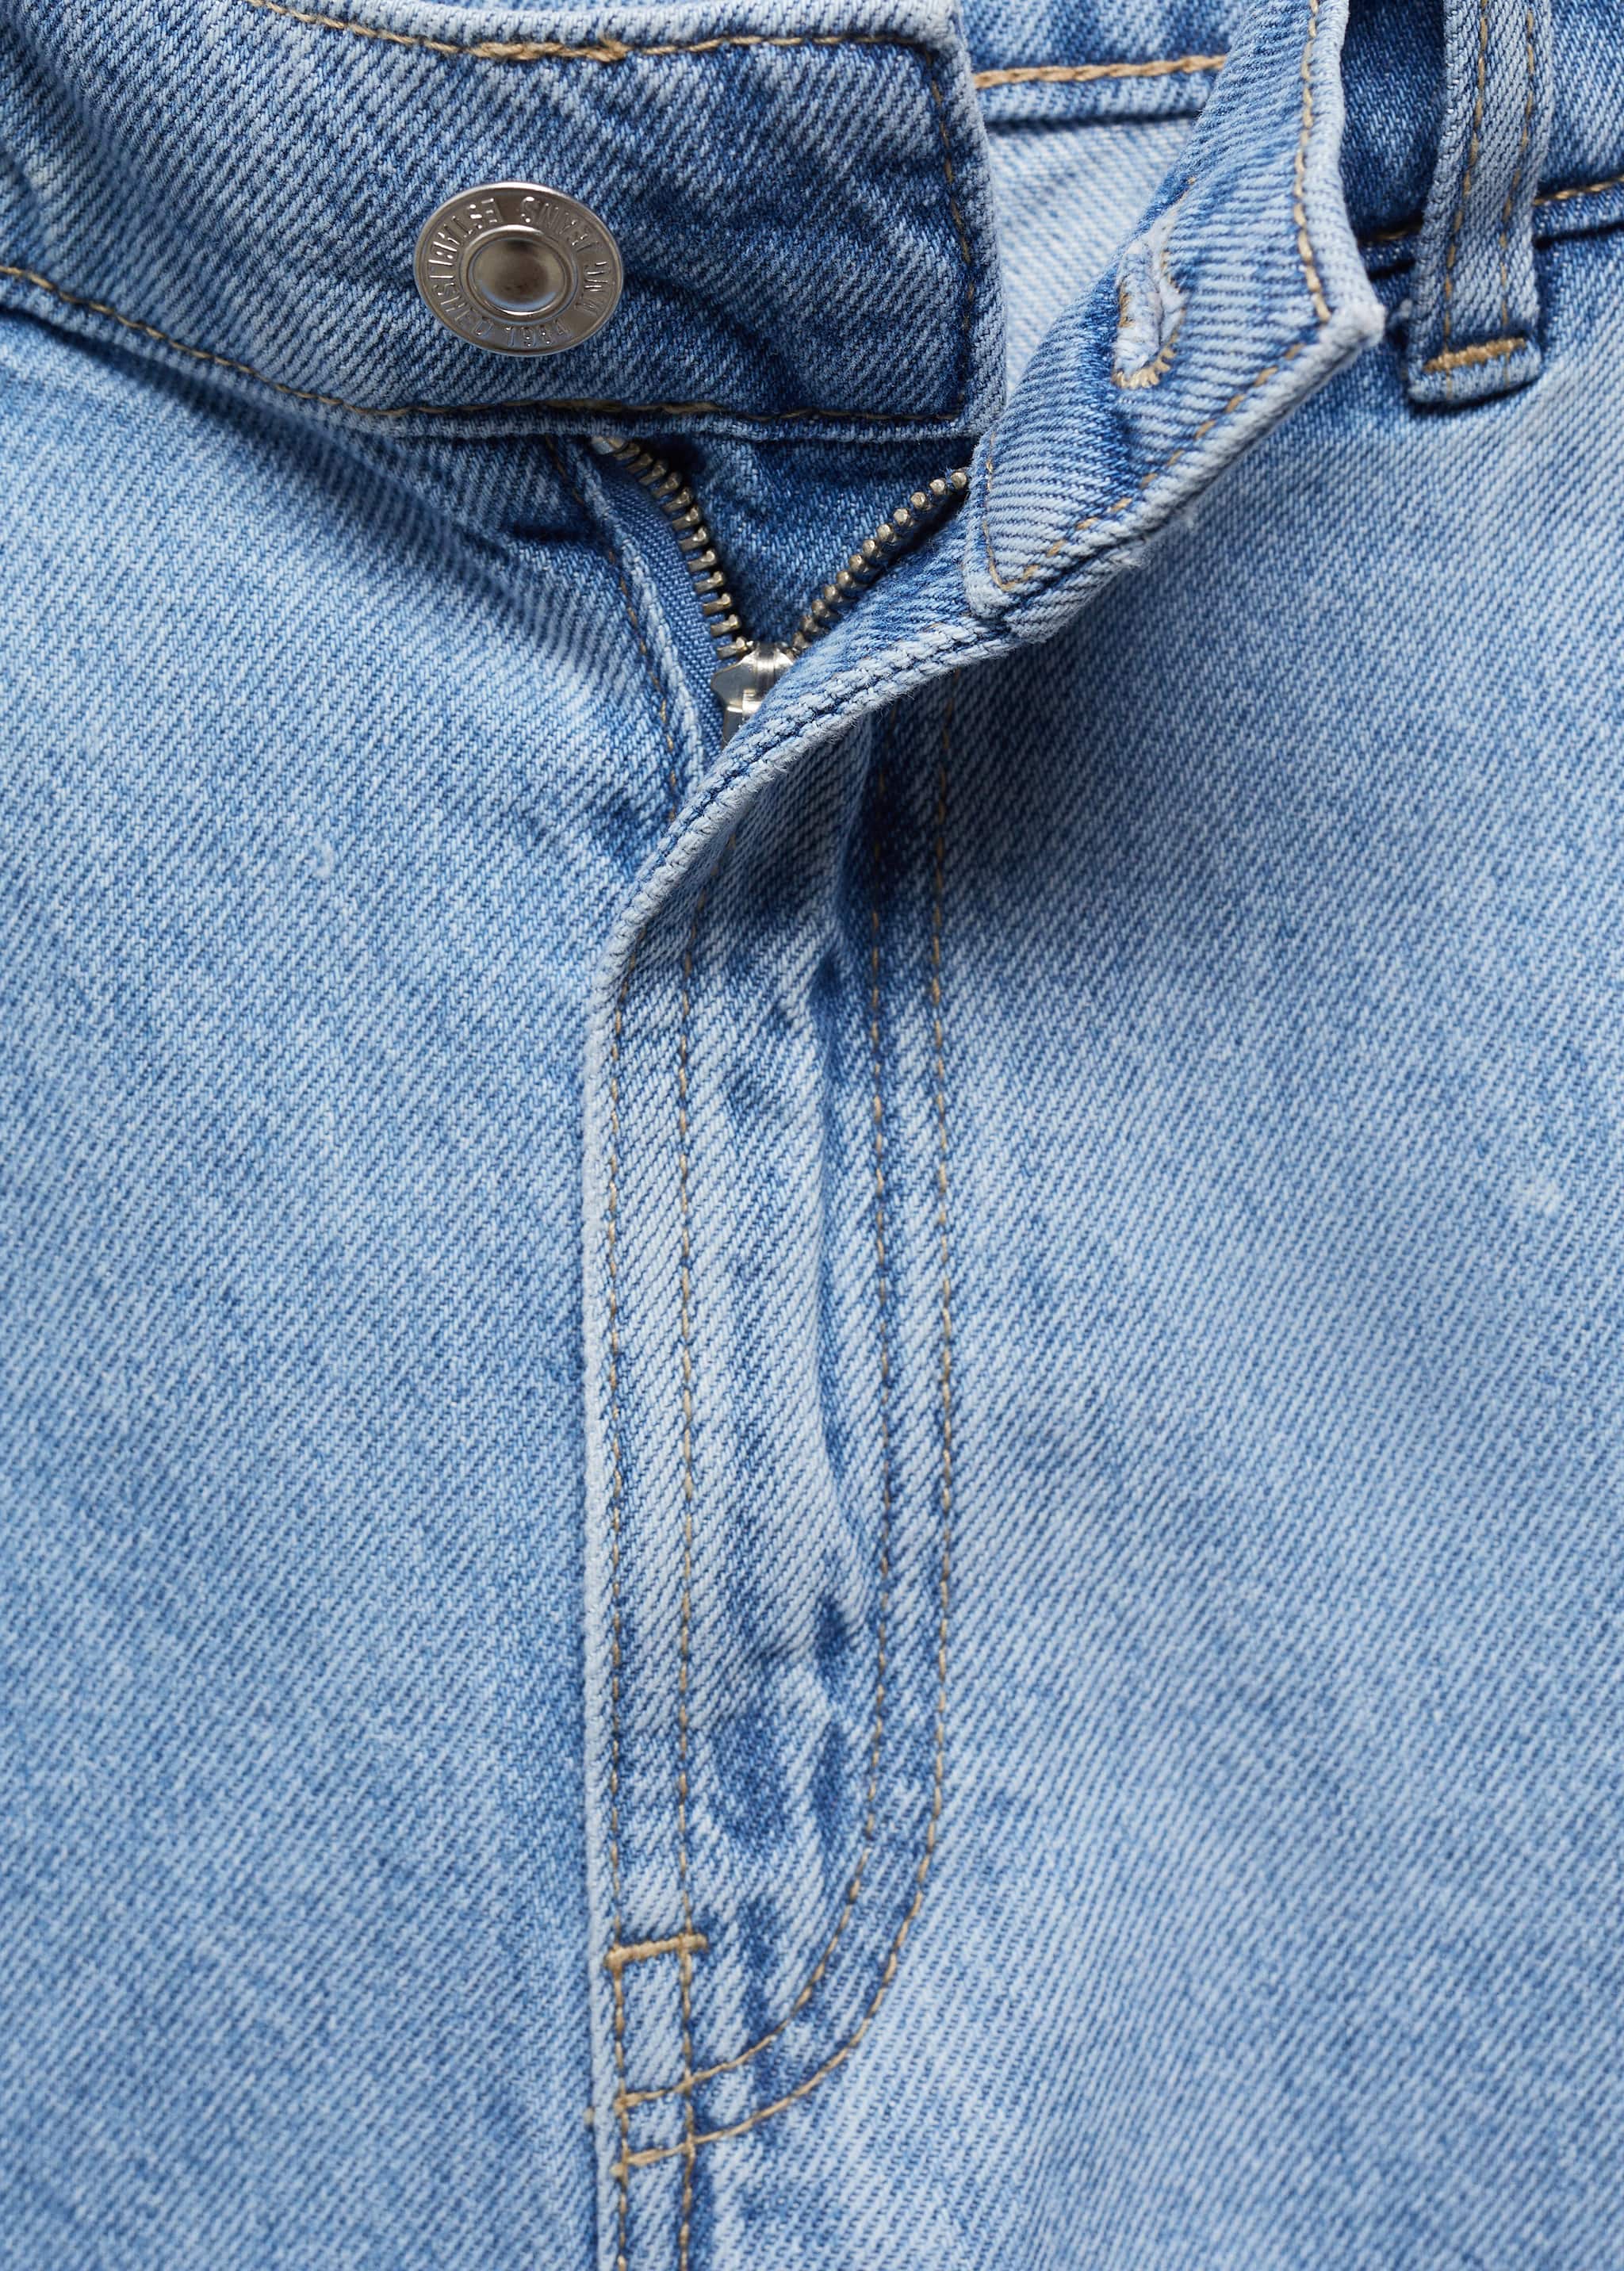 Denim shorts with pleats - Details of the article 8